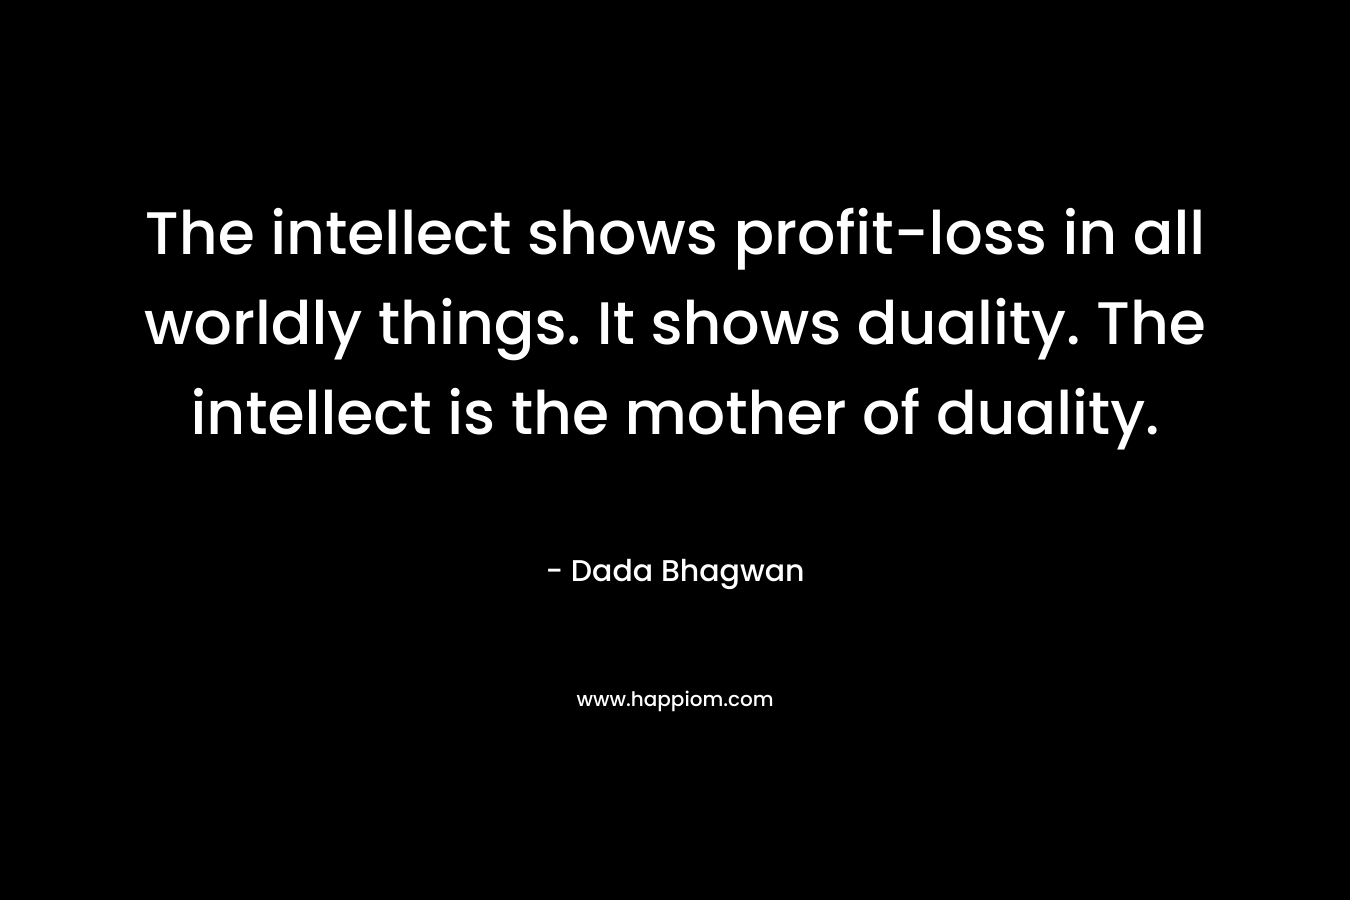 The intellect shows profit-loss in all worldly things. It shows duality. The intellect is the mother of duality.